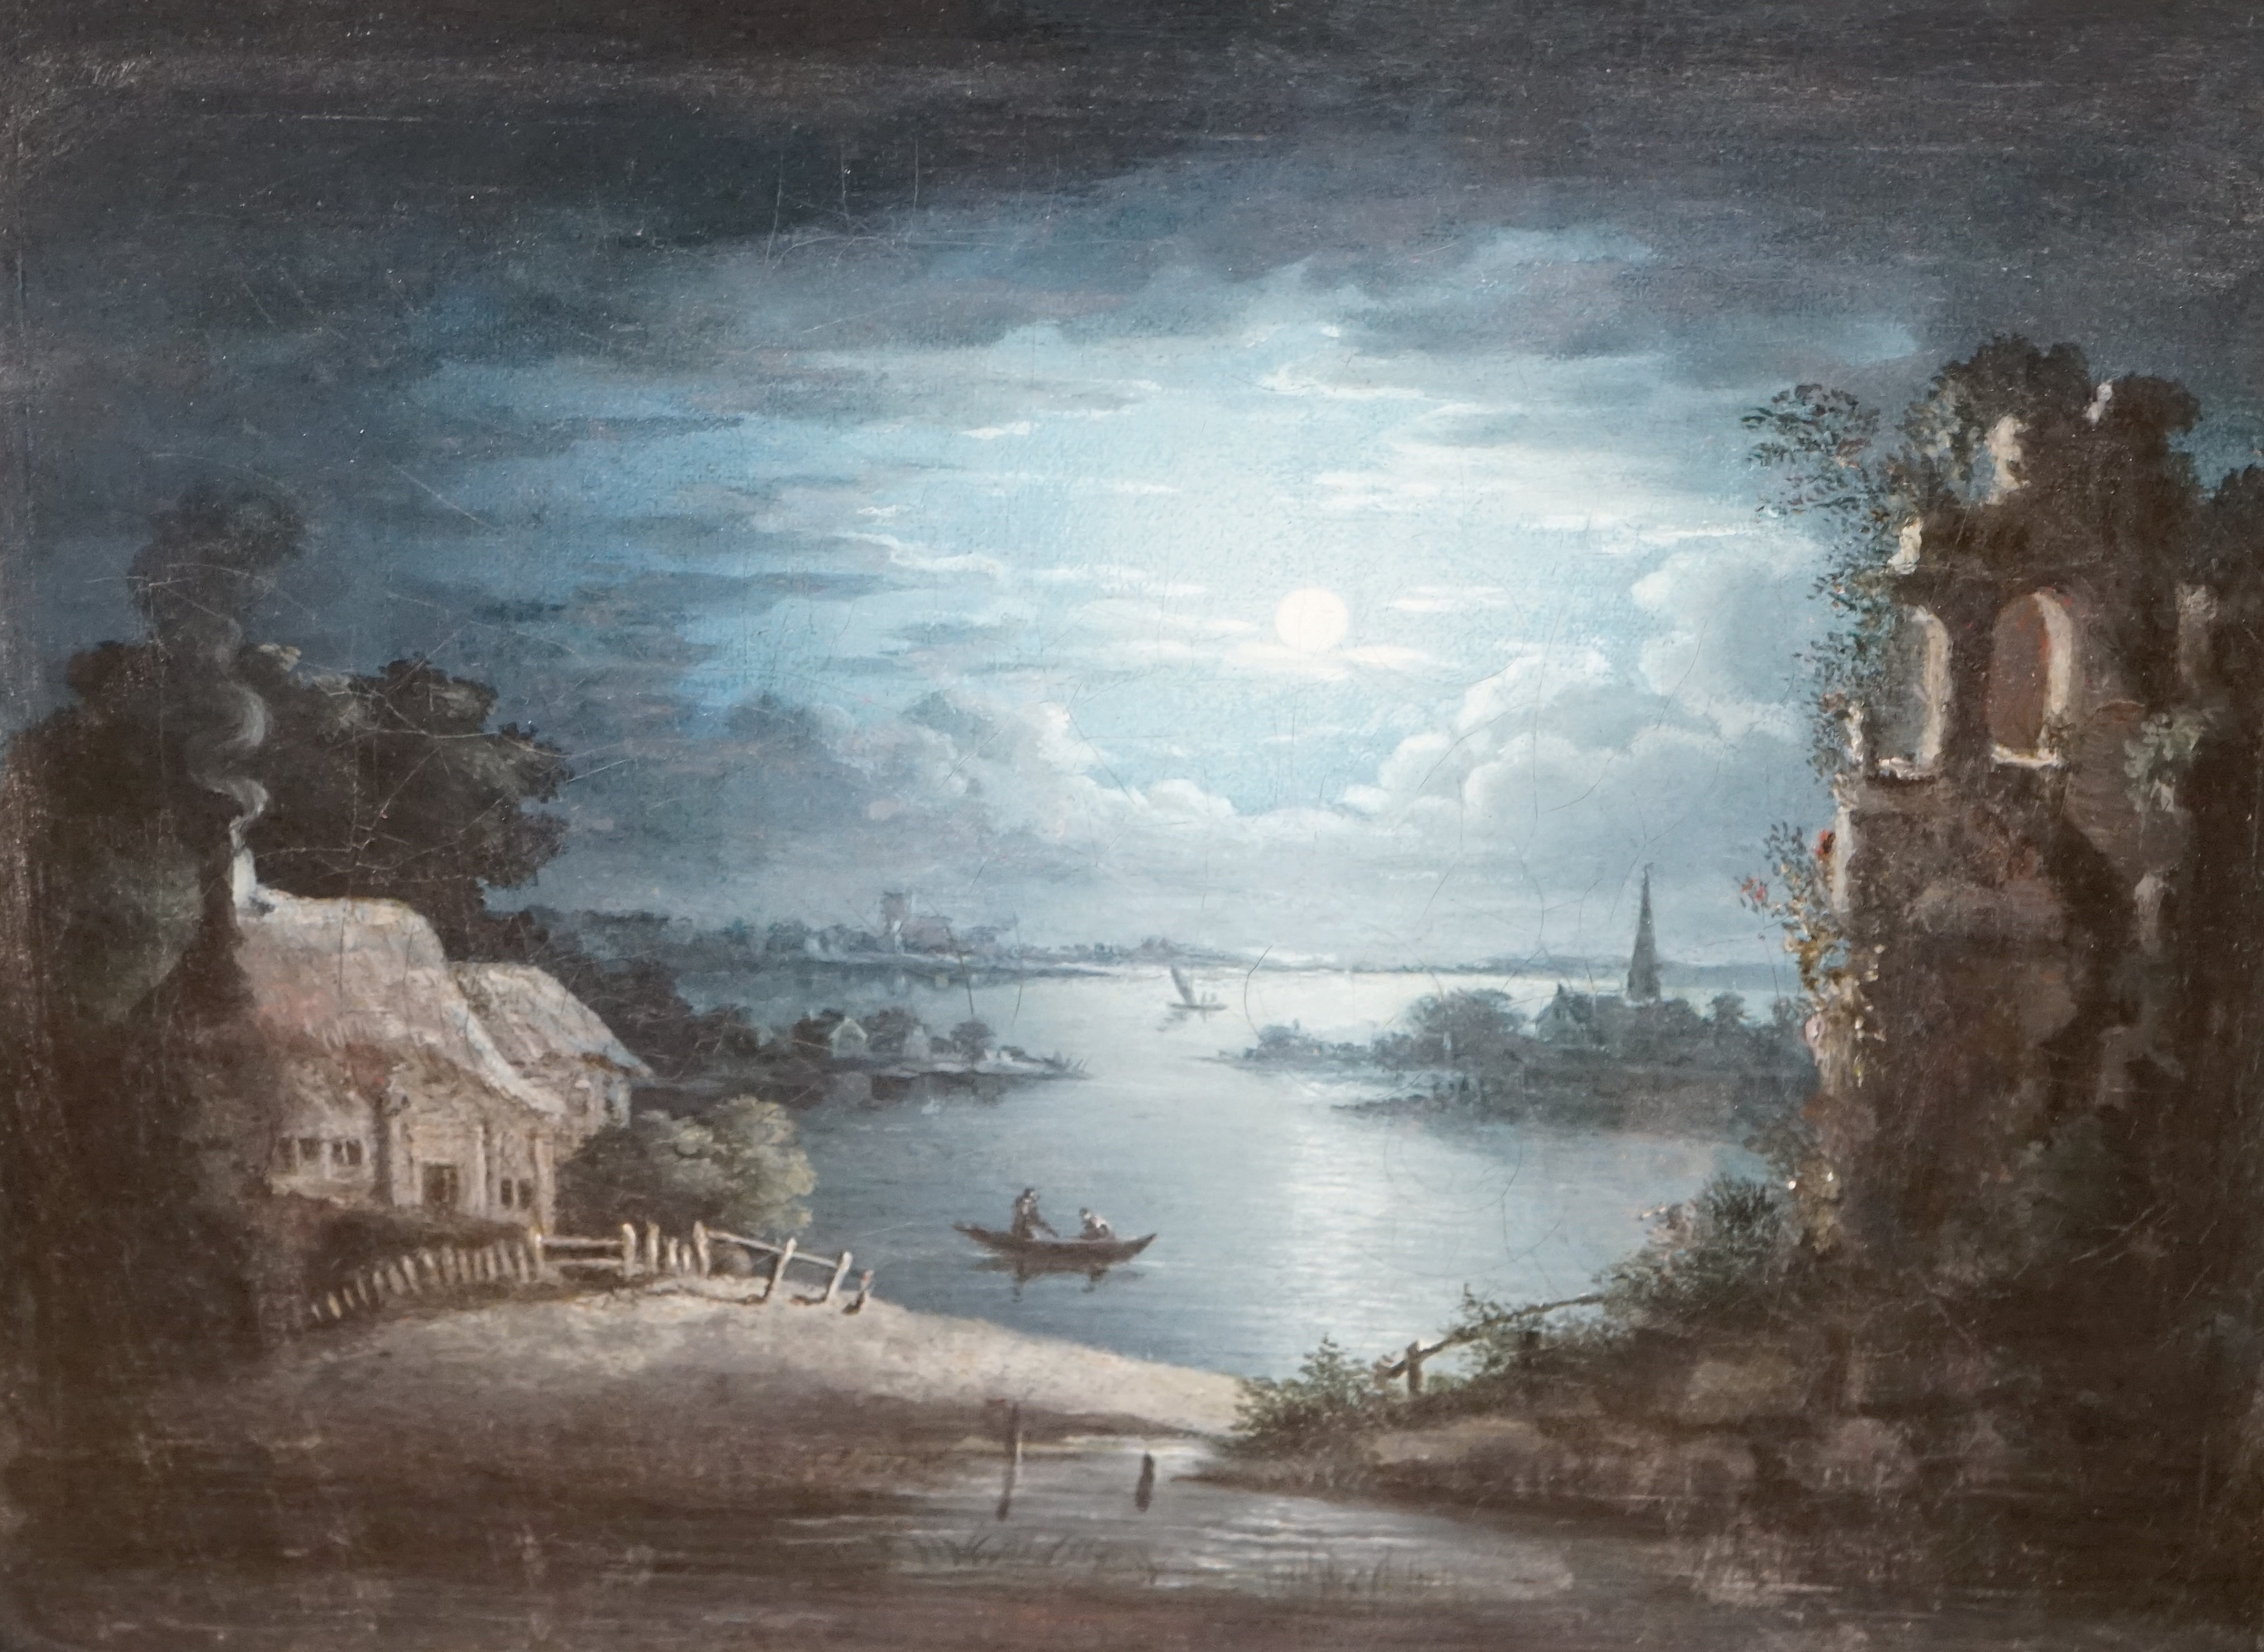 Pever?, 19th century, oil on canvas, Moonlit scene with cottages and boats, 19.5 x 20.5cm, ornate gilt framed. Condition - fair to good, some losses to the frame